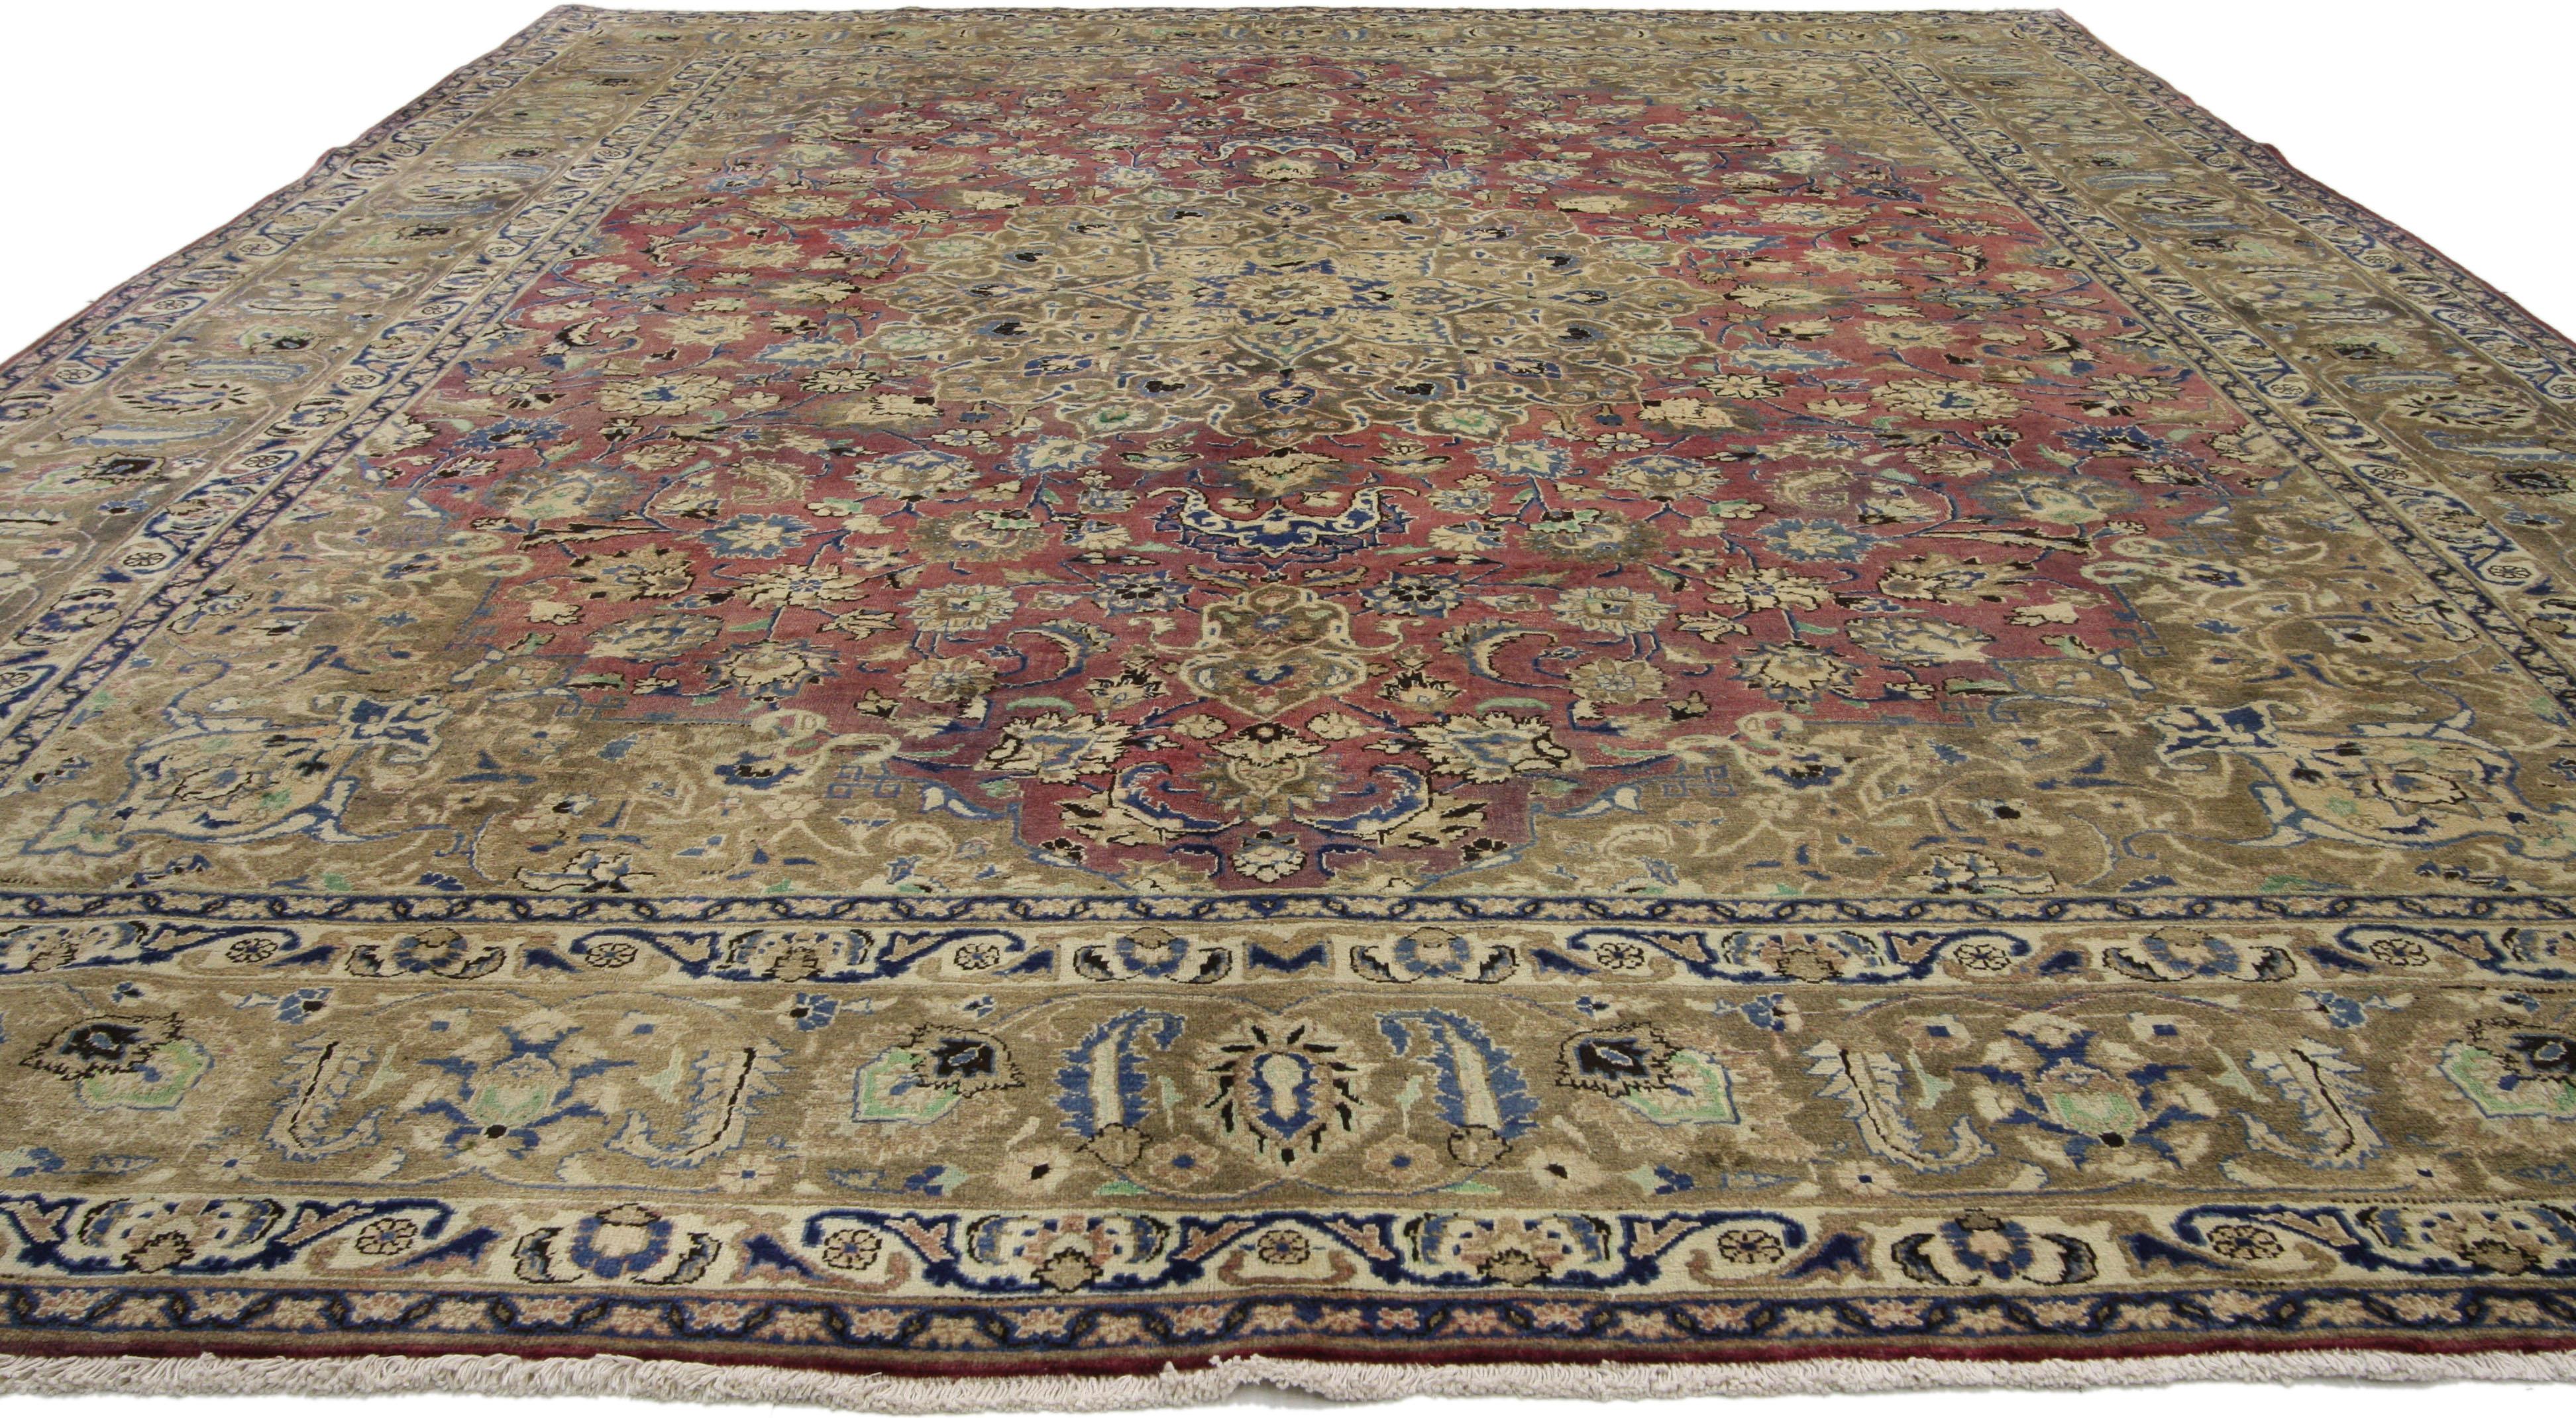 76466, vintage Persian Khorassan Area rug with traditional style. This hand-knotted wool vintage Persian Khorassan rug features an eight-point star inside a 16-point centre medallion and complementary spandrels with an all-over arabesque floral